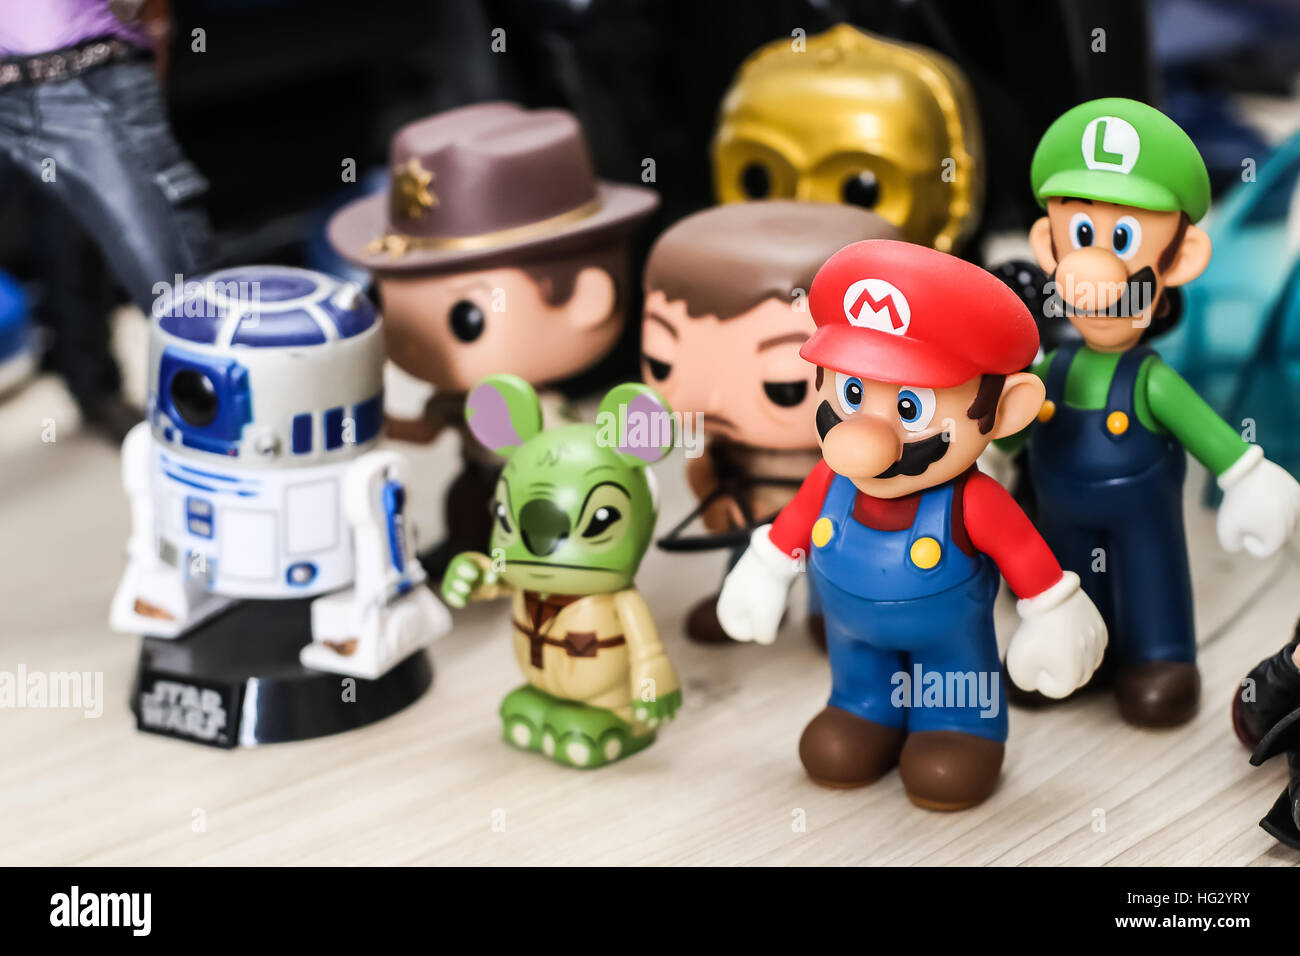 A group of known toys on a table Stock Photo